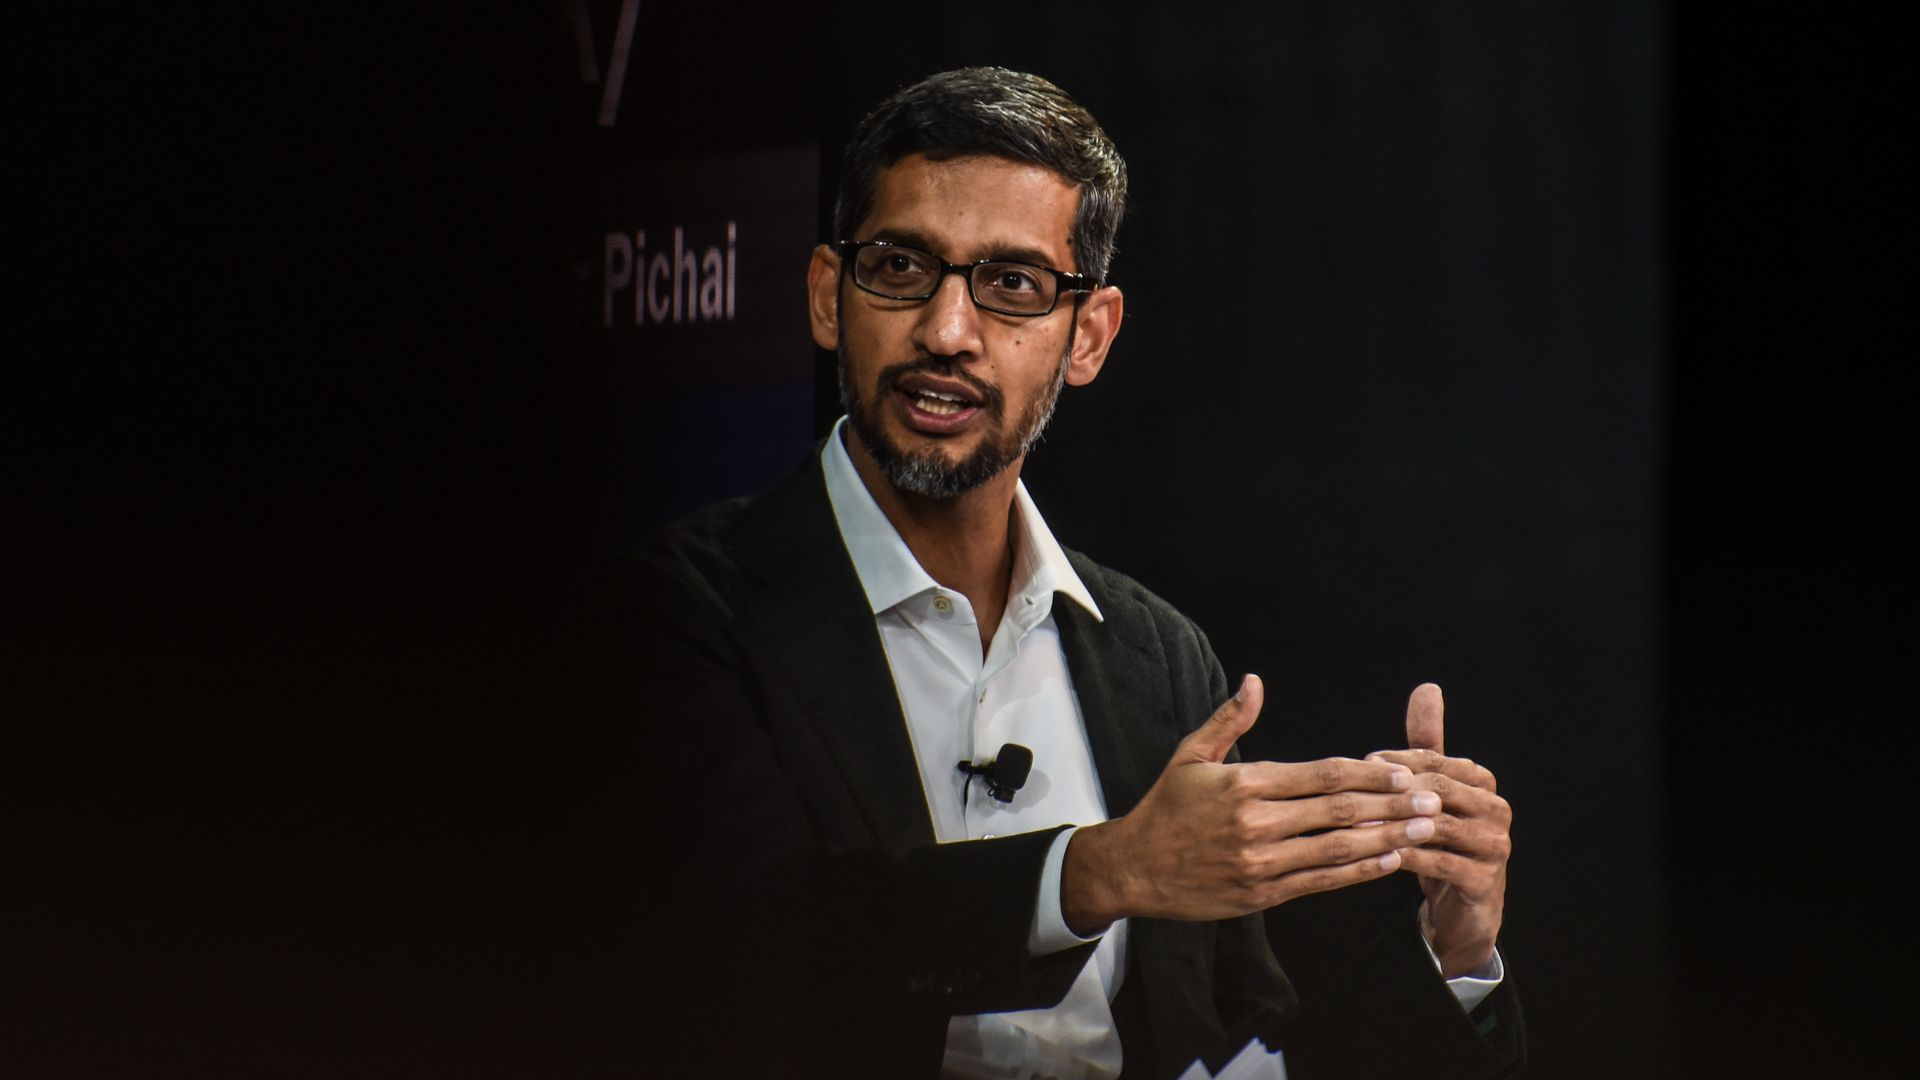 Sundar Pichai speaking at a conference